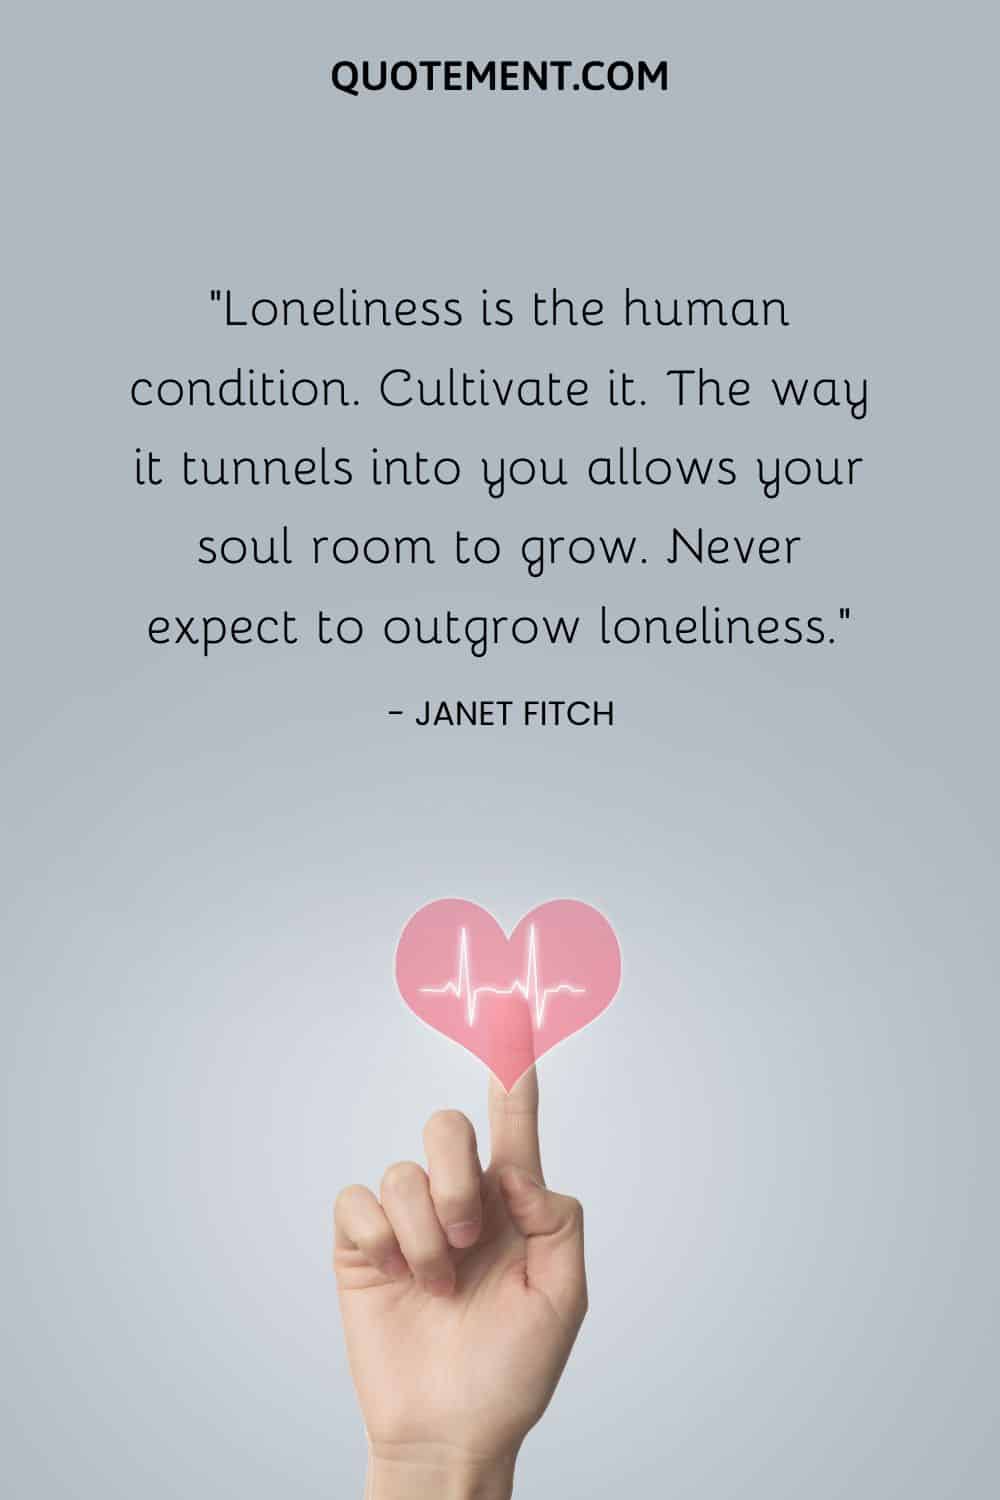 Loneliness is the human condition